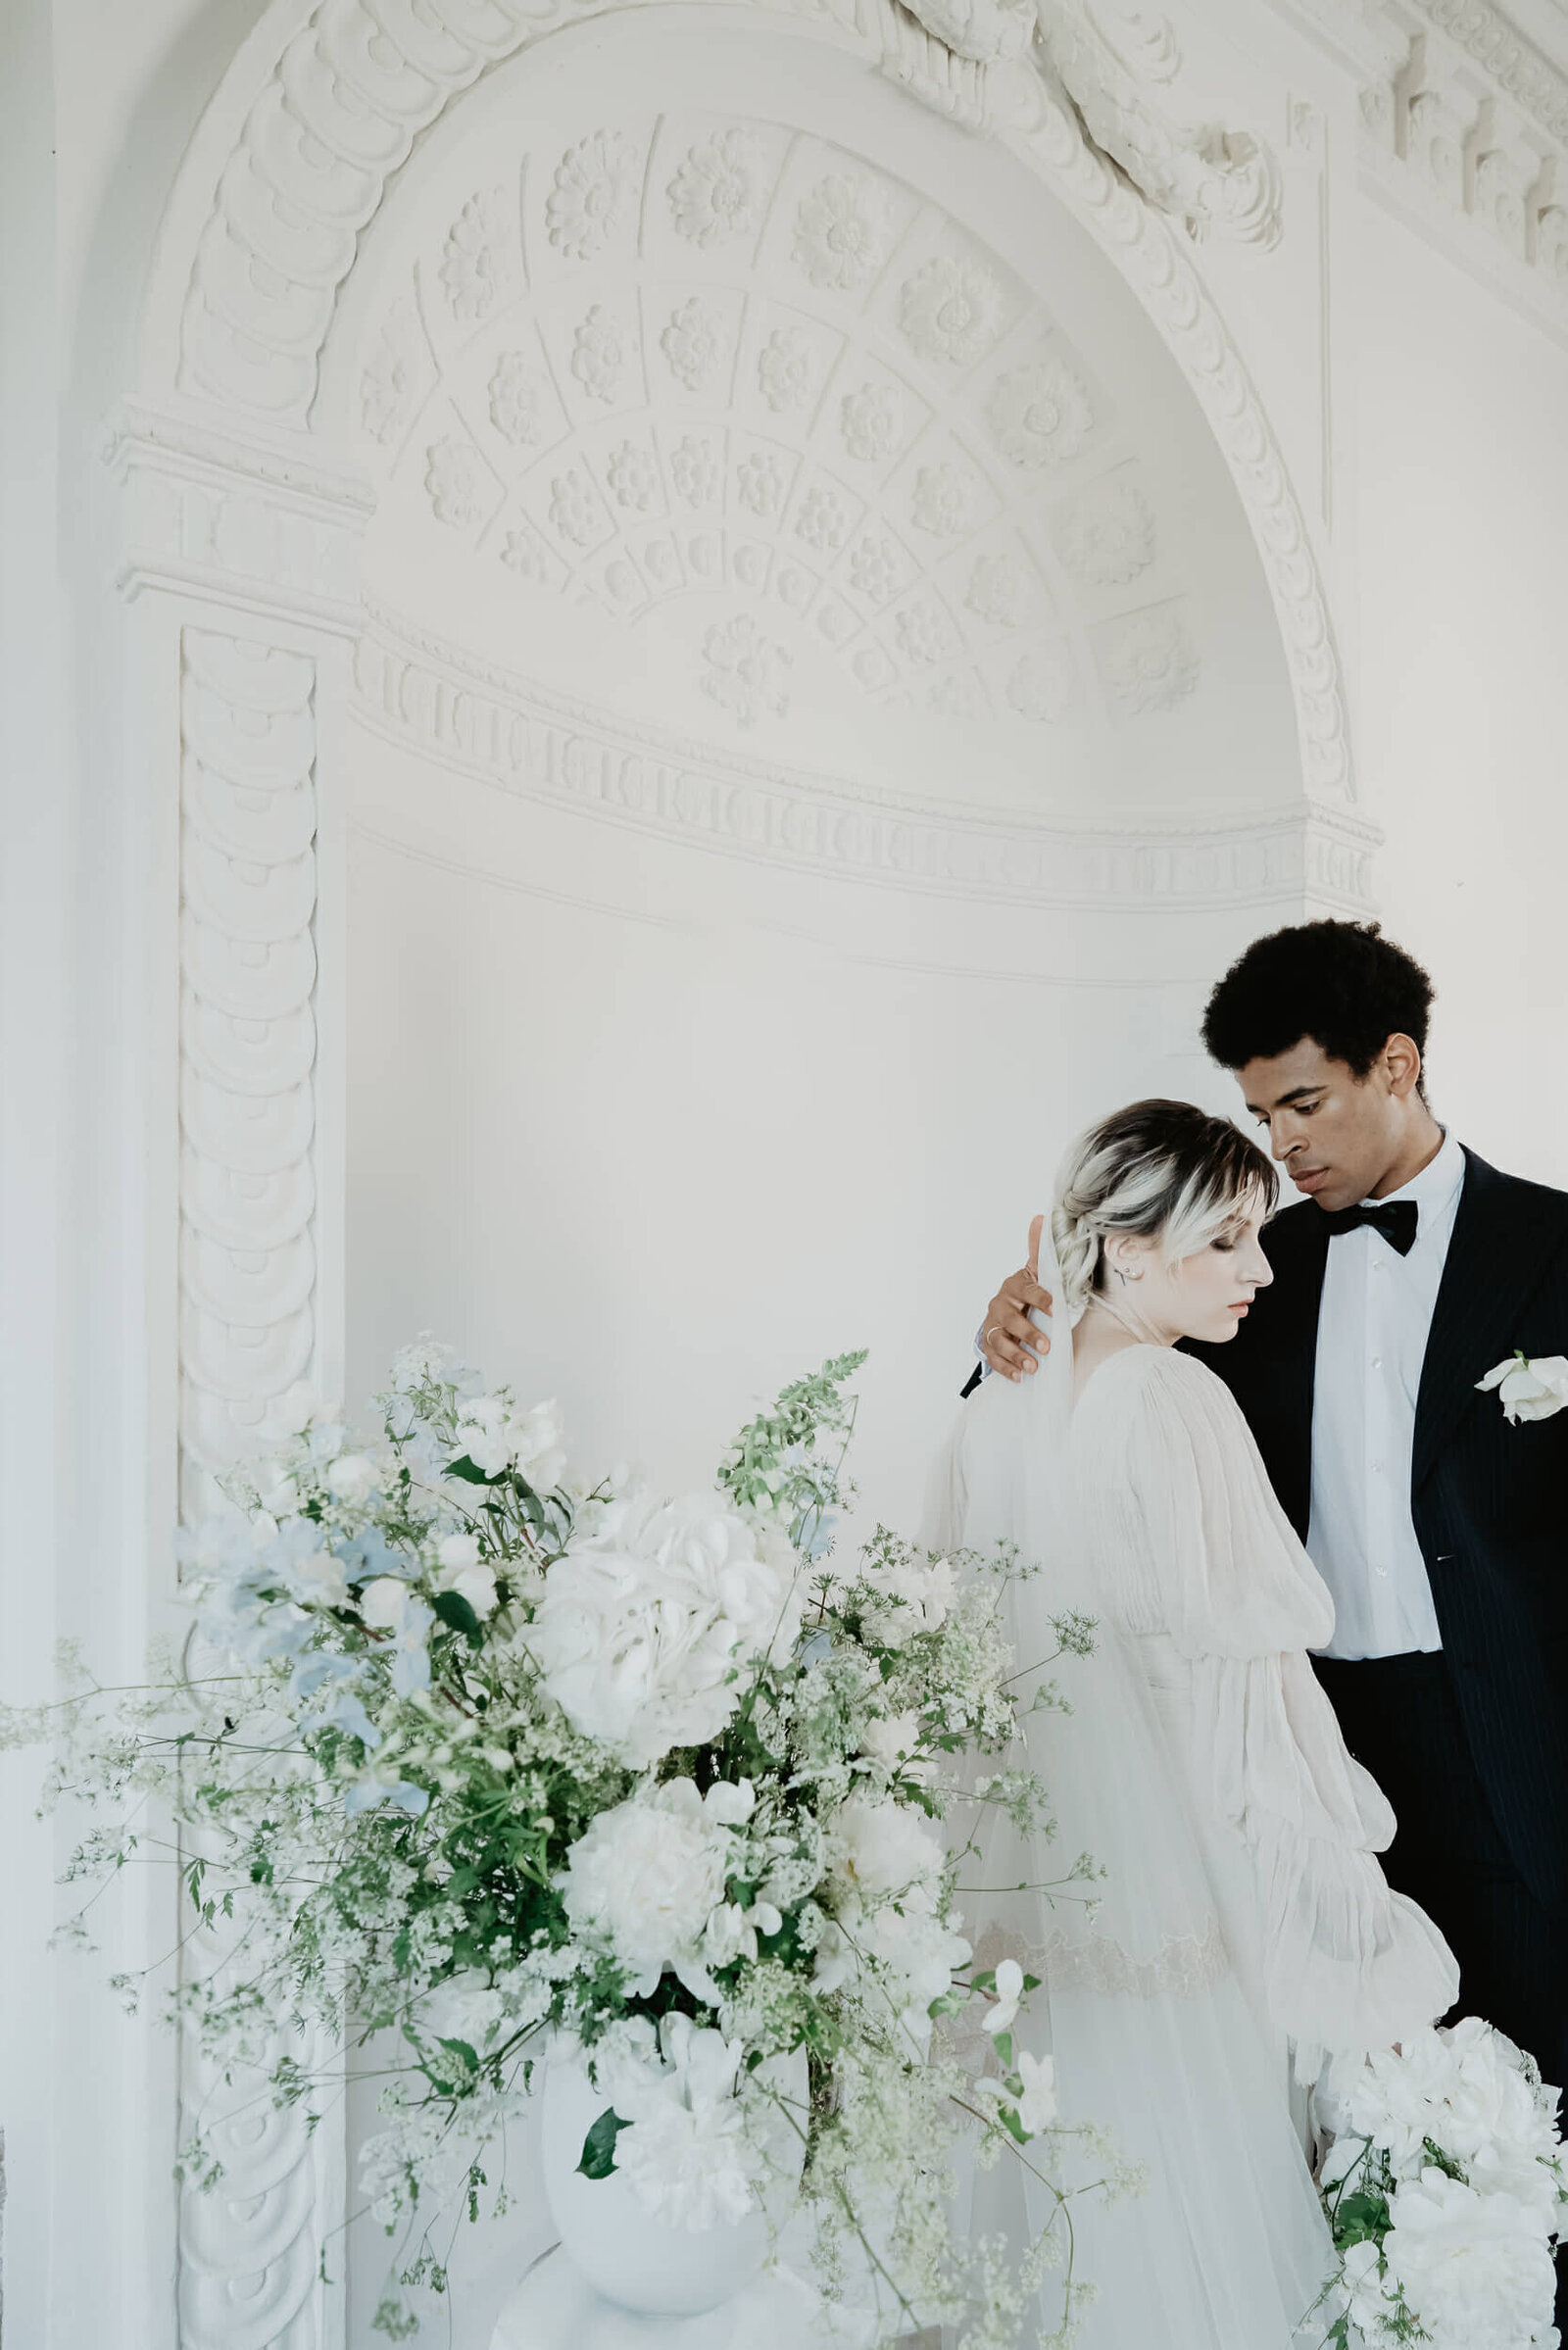 Destination Wedding in Germany wedding inspiration "Poetry of clouds" at Schloss Virnsberg - by wedding photographer SELENE ADORES-266